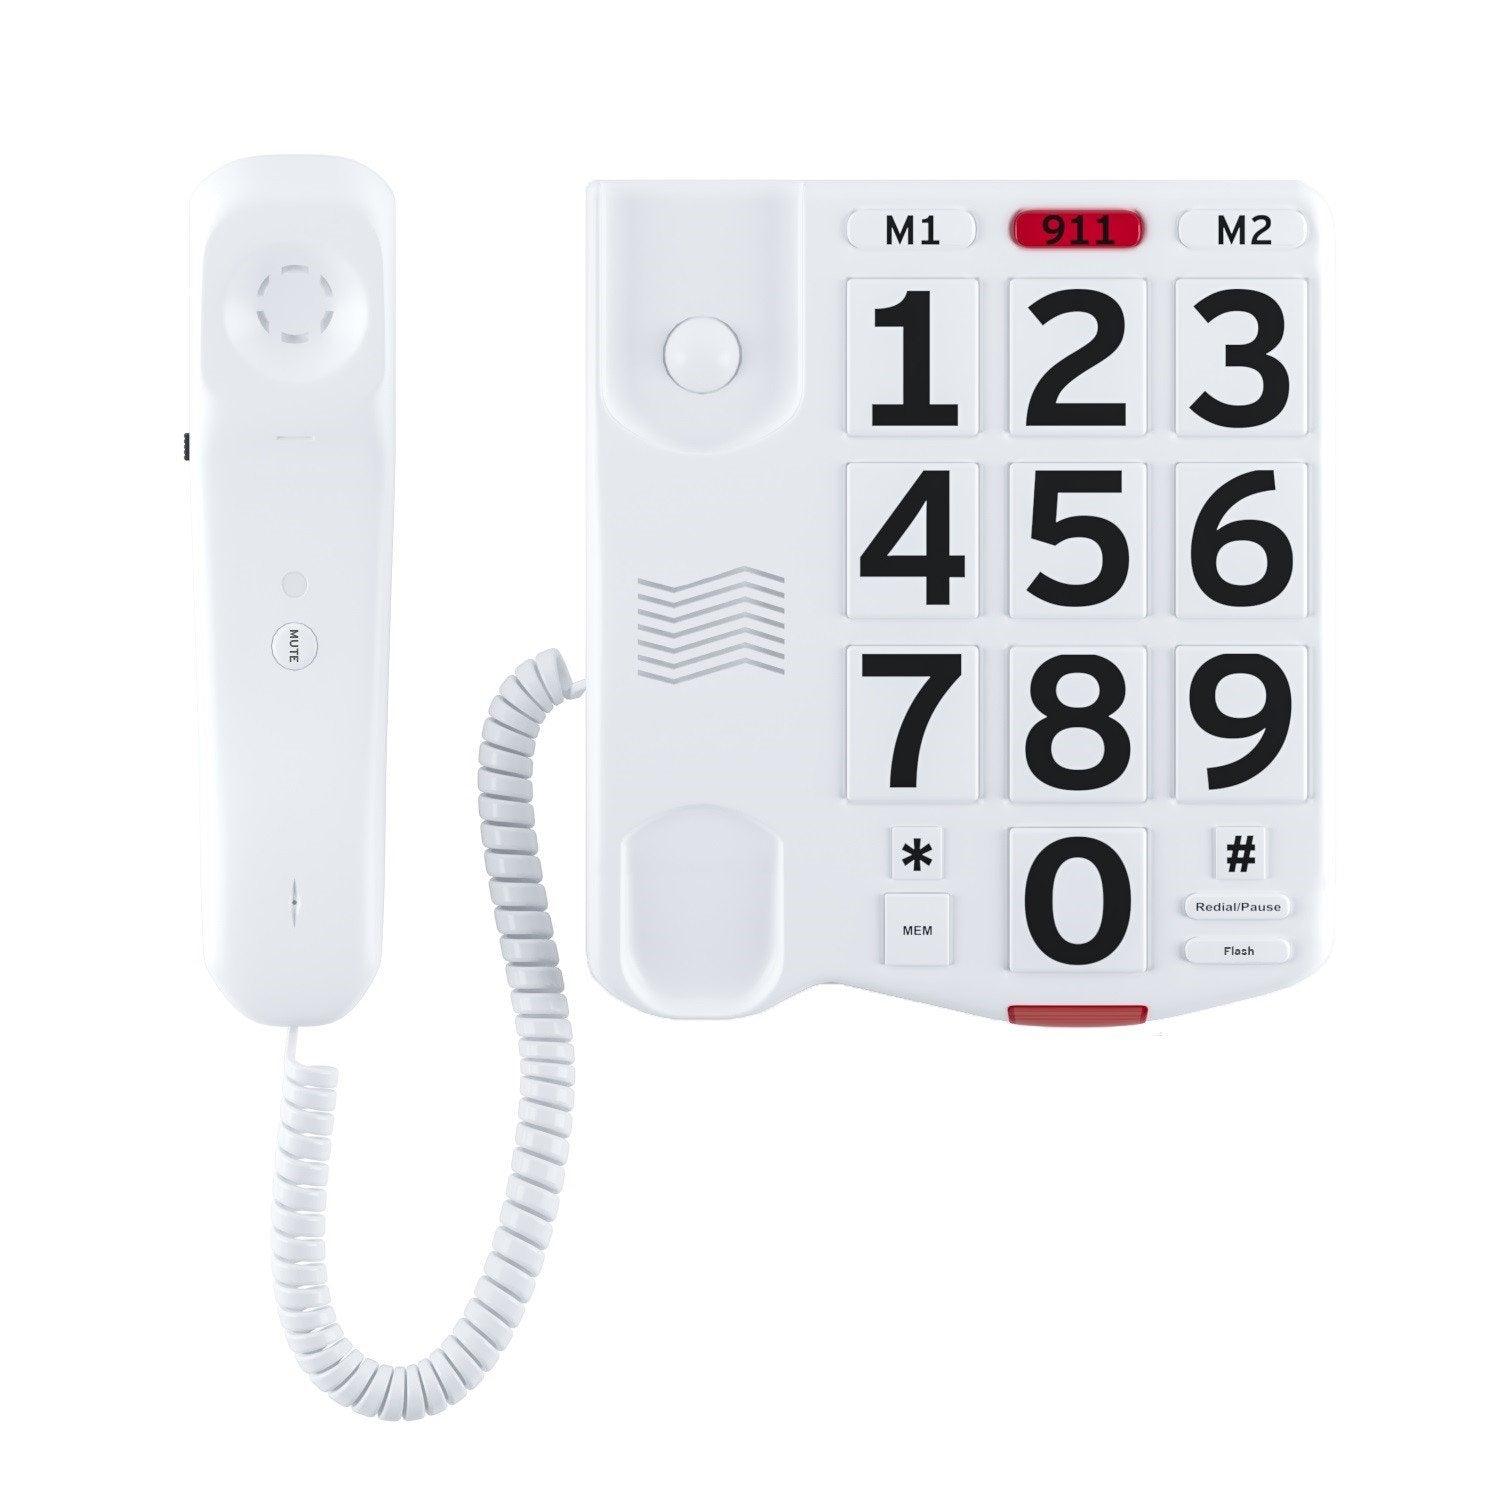 Big Button Phone with 40db Handset Volume - The Low Vision Store